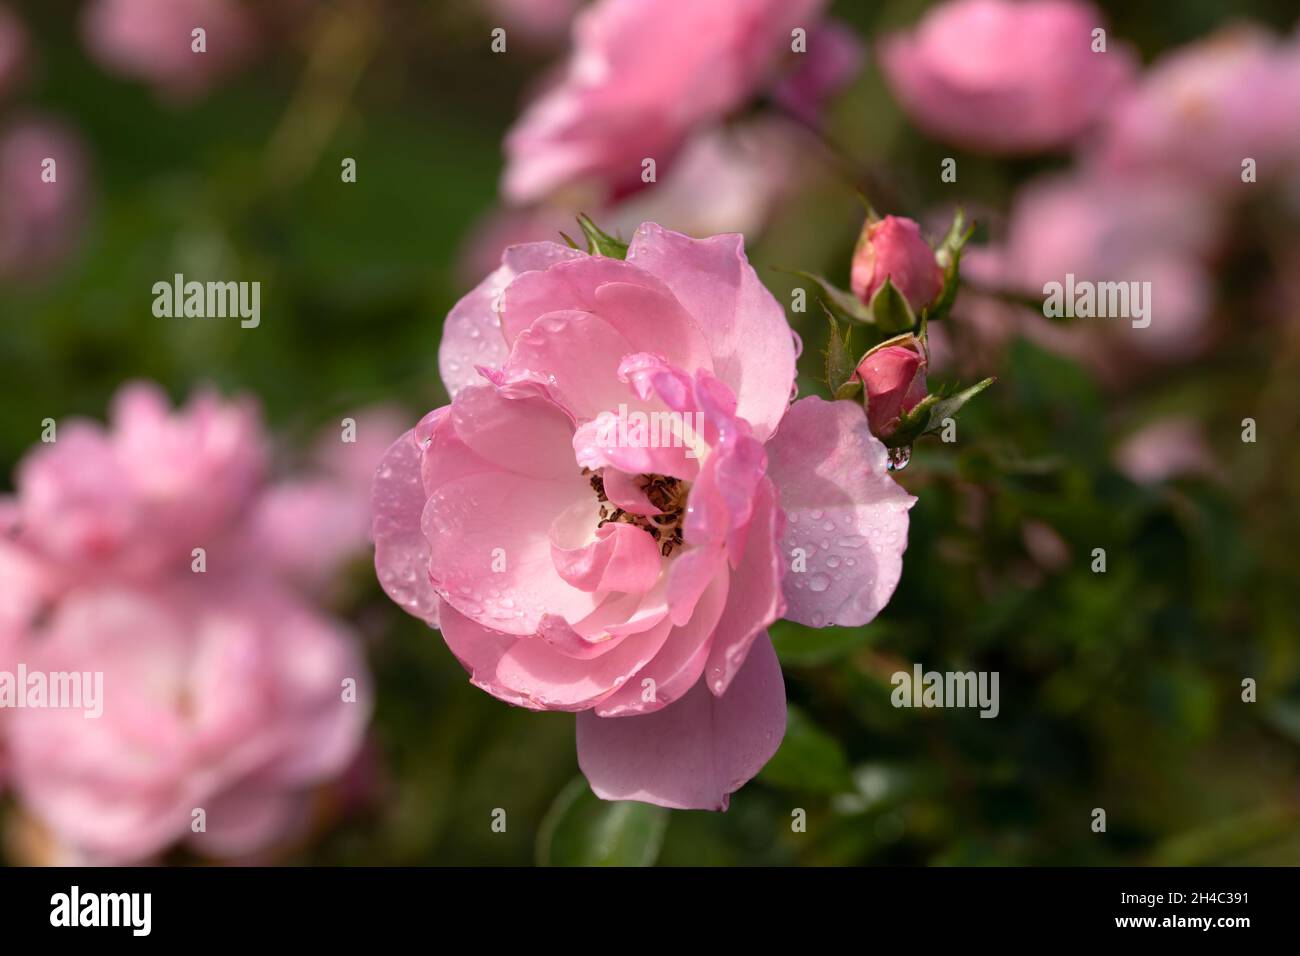 Closeup of flowers of Rosa 'Bonica 82' with water drops after a shower of rain Stock Photo